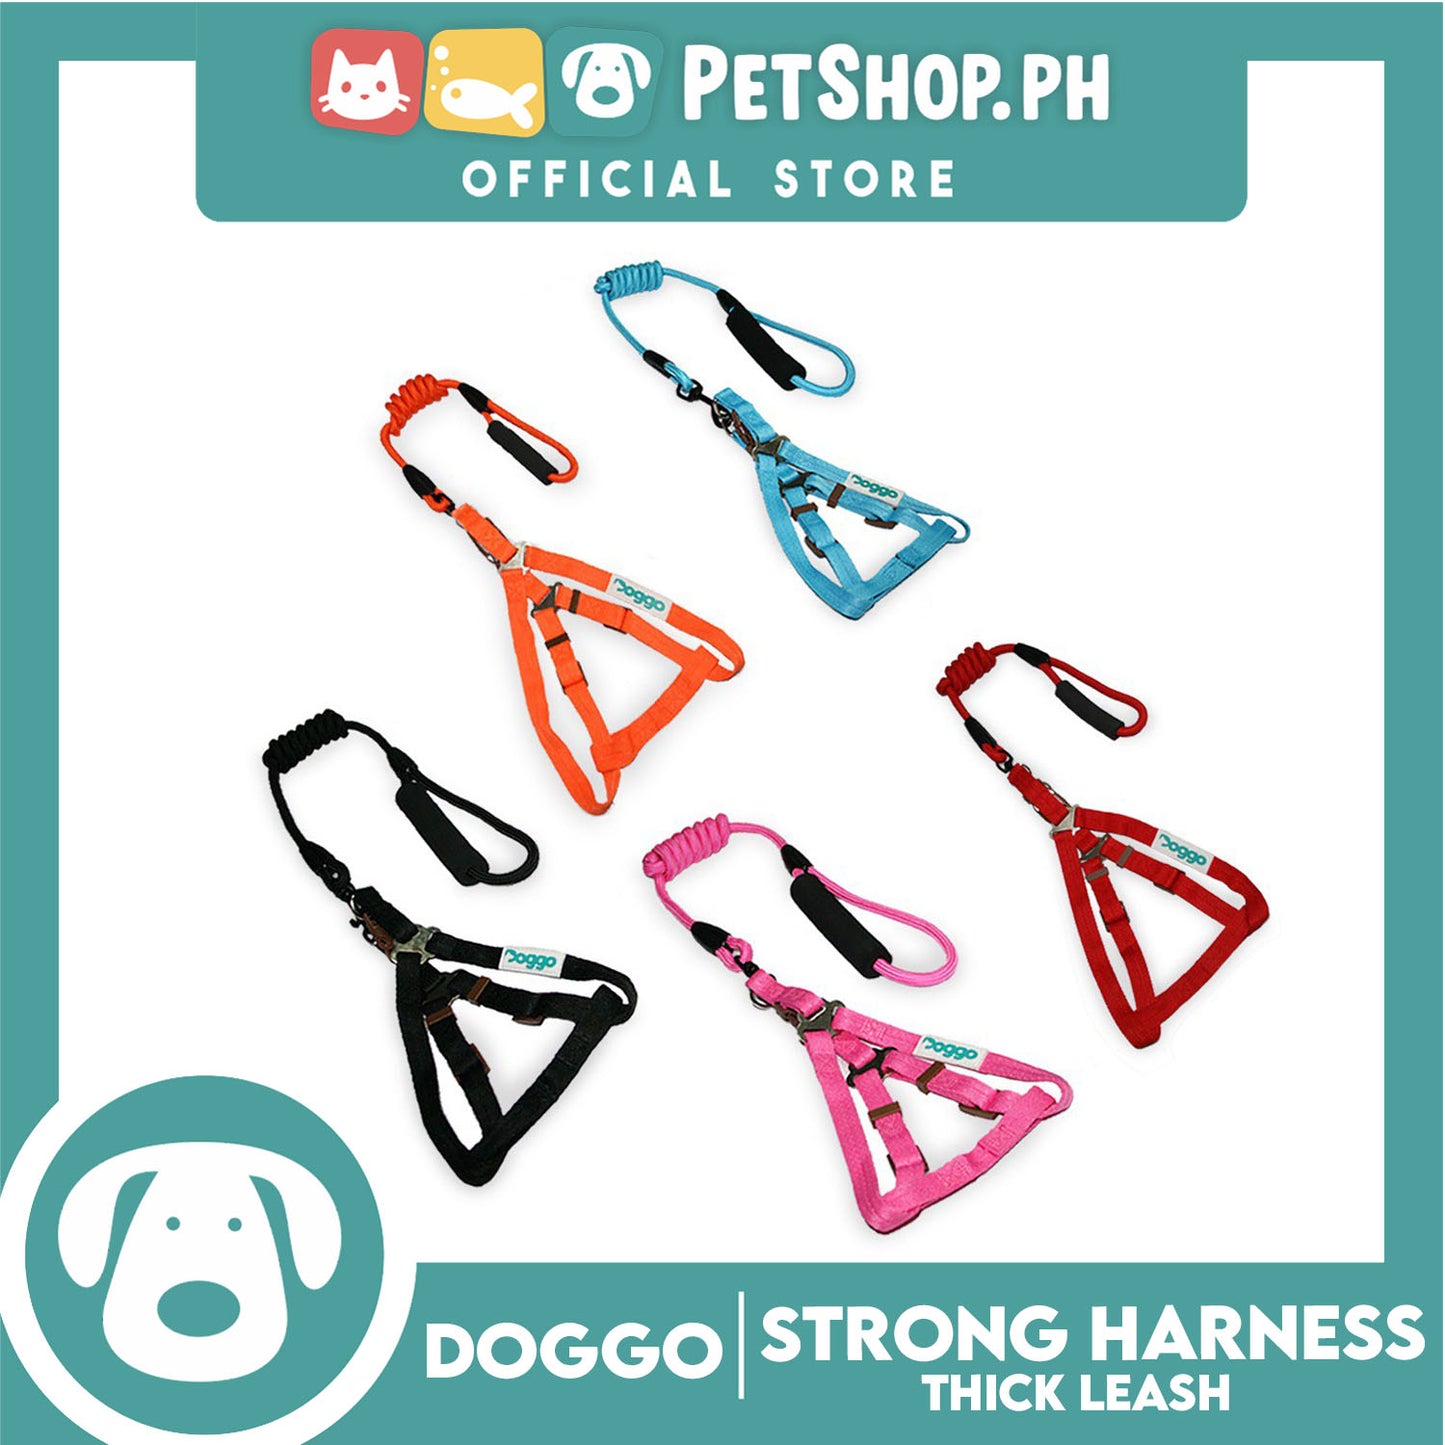 Doggo Strong Harness Thick Leash Soft Handle Steel Connector Medium (Pink) Safe Harness for Your Dog